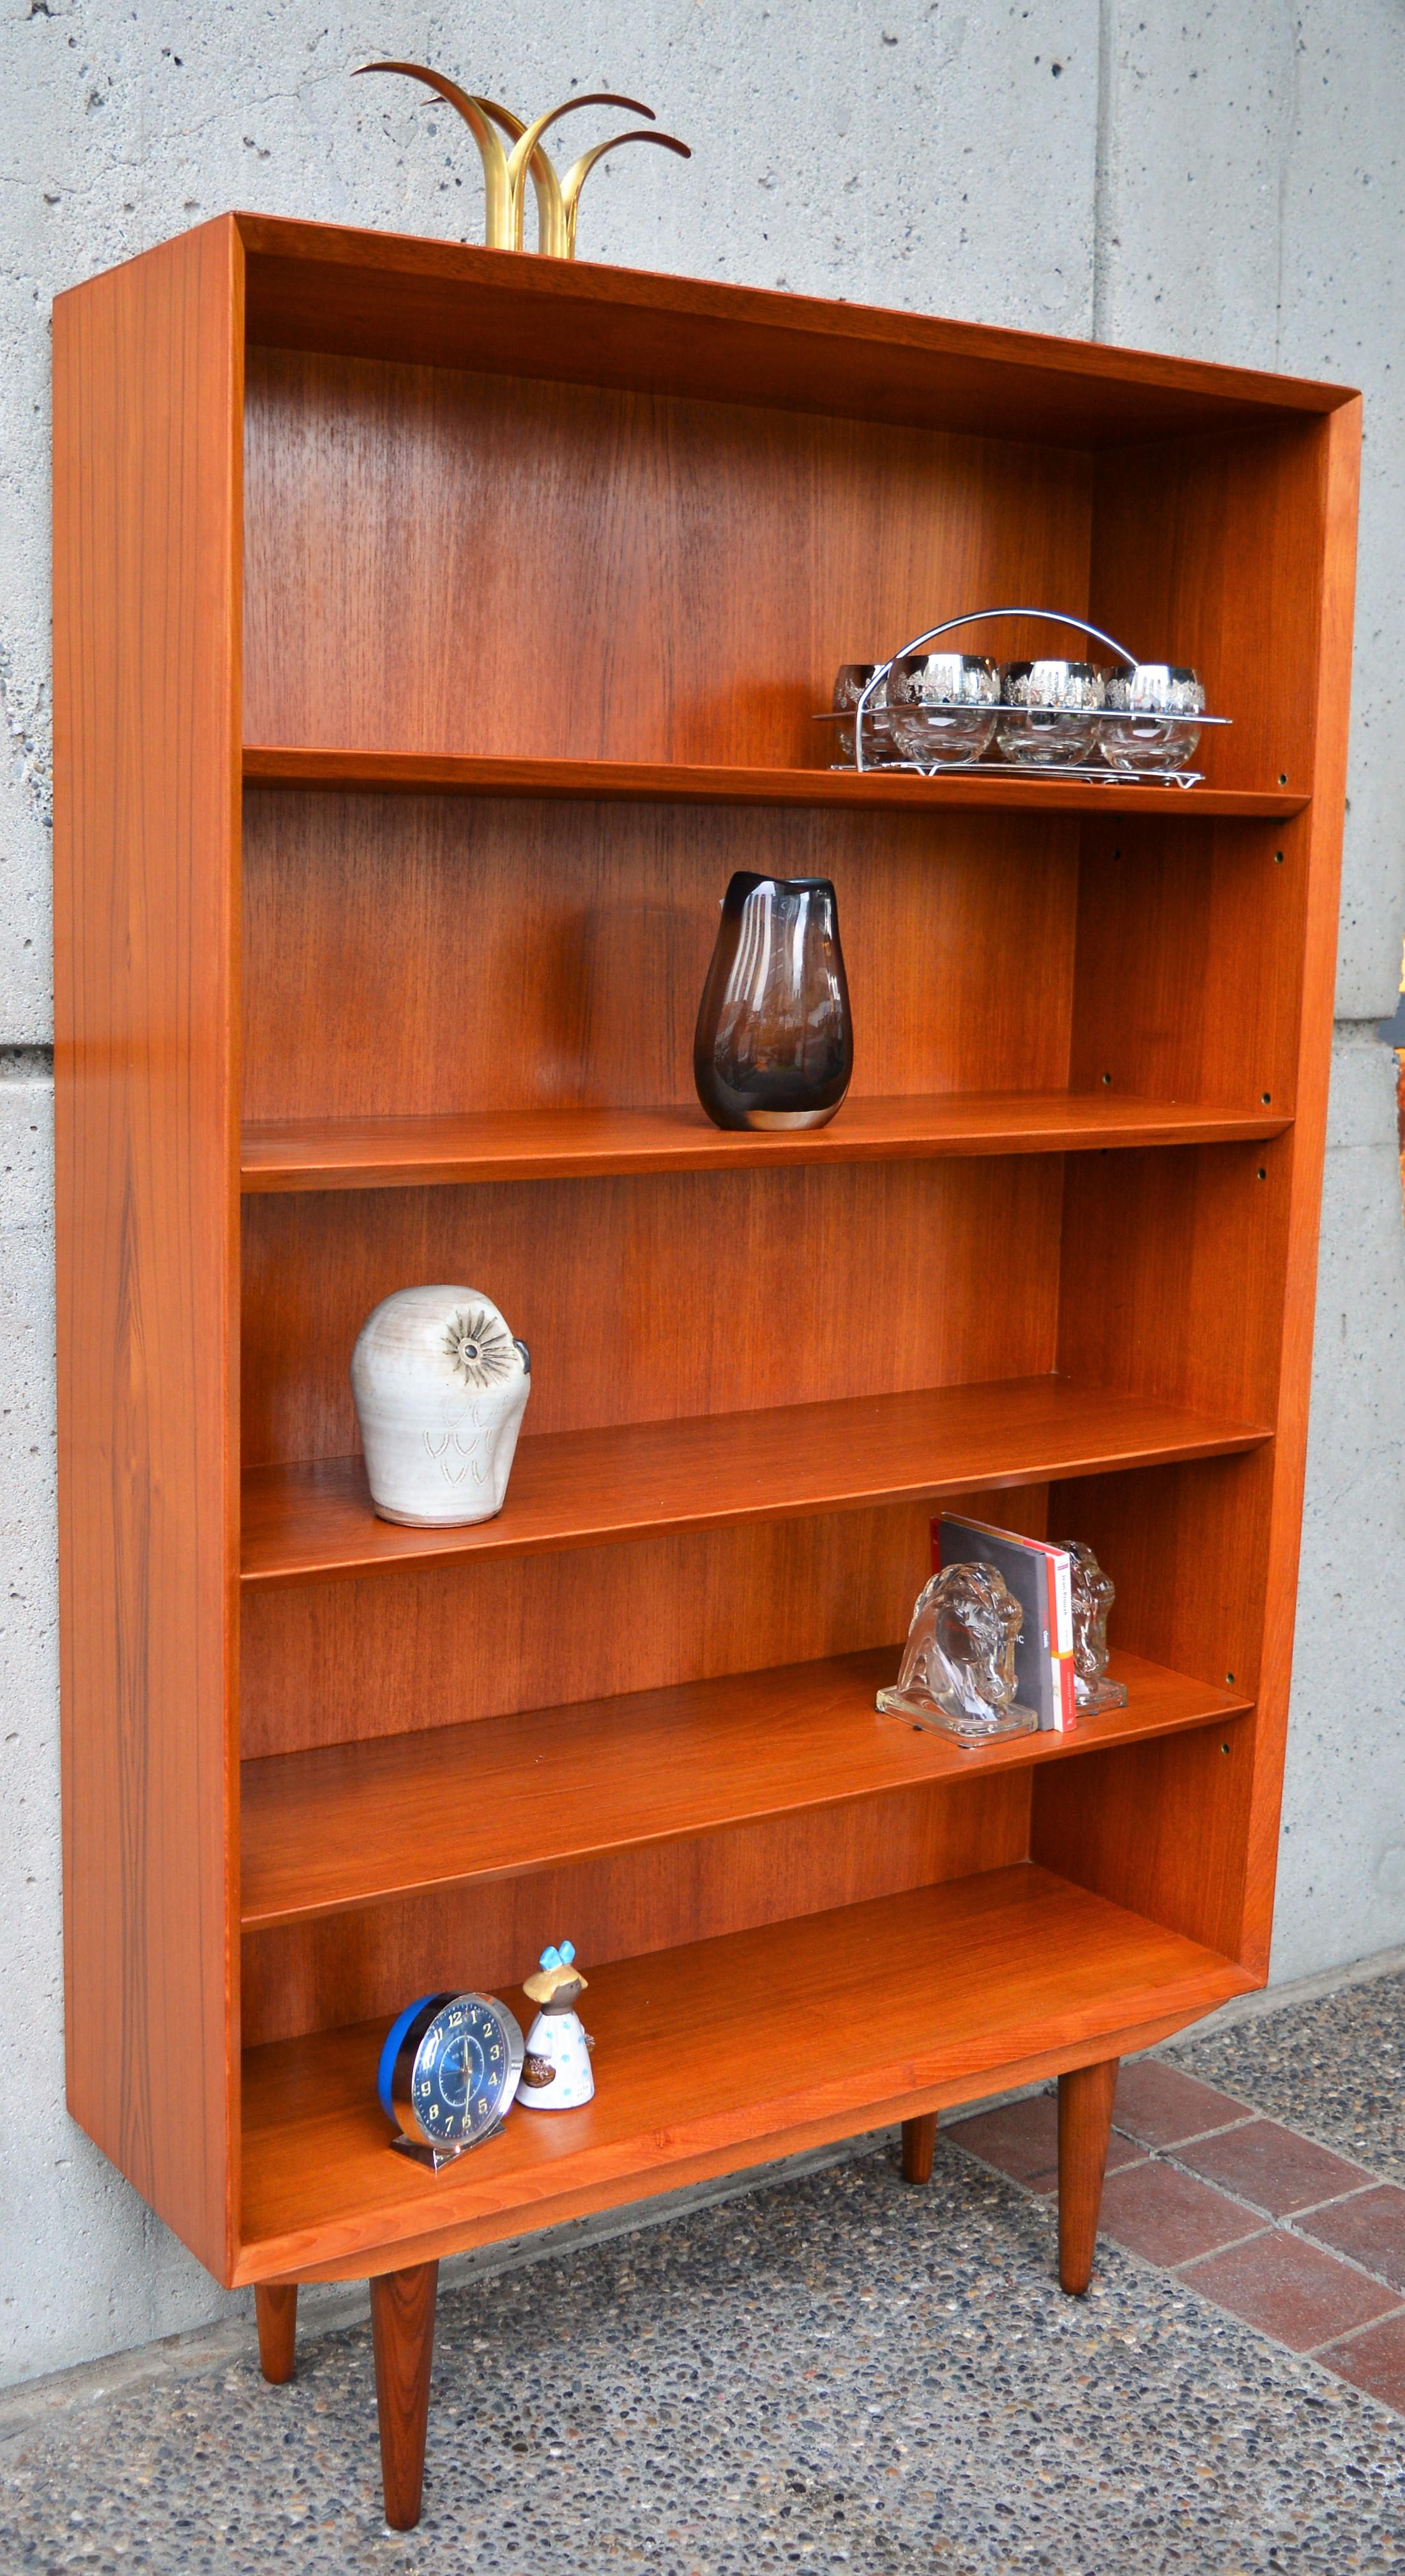 This fabulous and super unusual Danish modern teak book shelf is awesome! Featuring a mitered front molding detail that echoes the angled front edges of the shelves. Finished with substantial conical legs (removable for transport.) 3 of the shelves